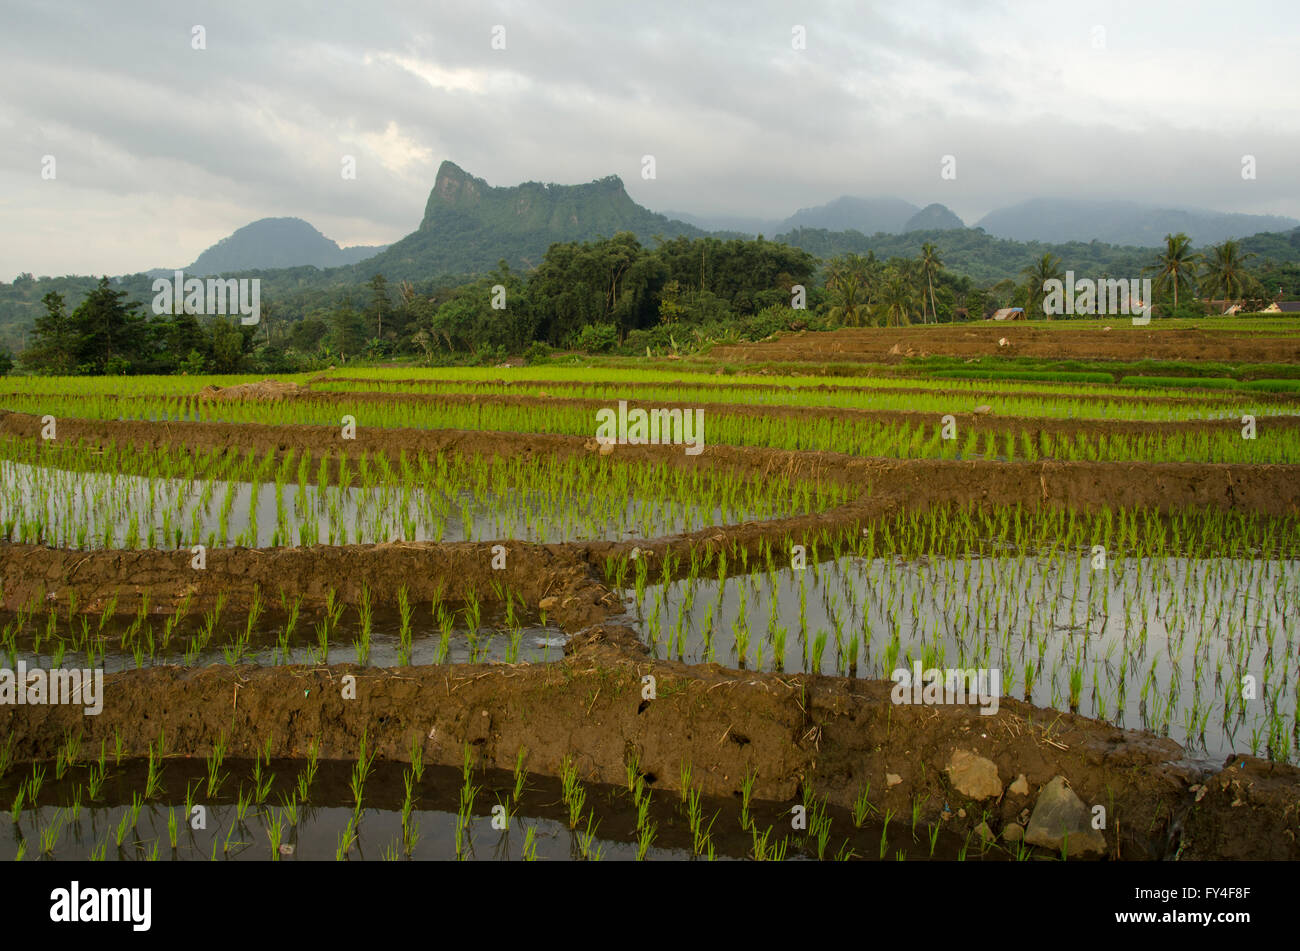 newly planted rice and at the back there are mountains Stock Photo